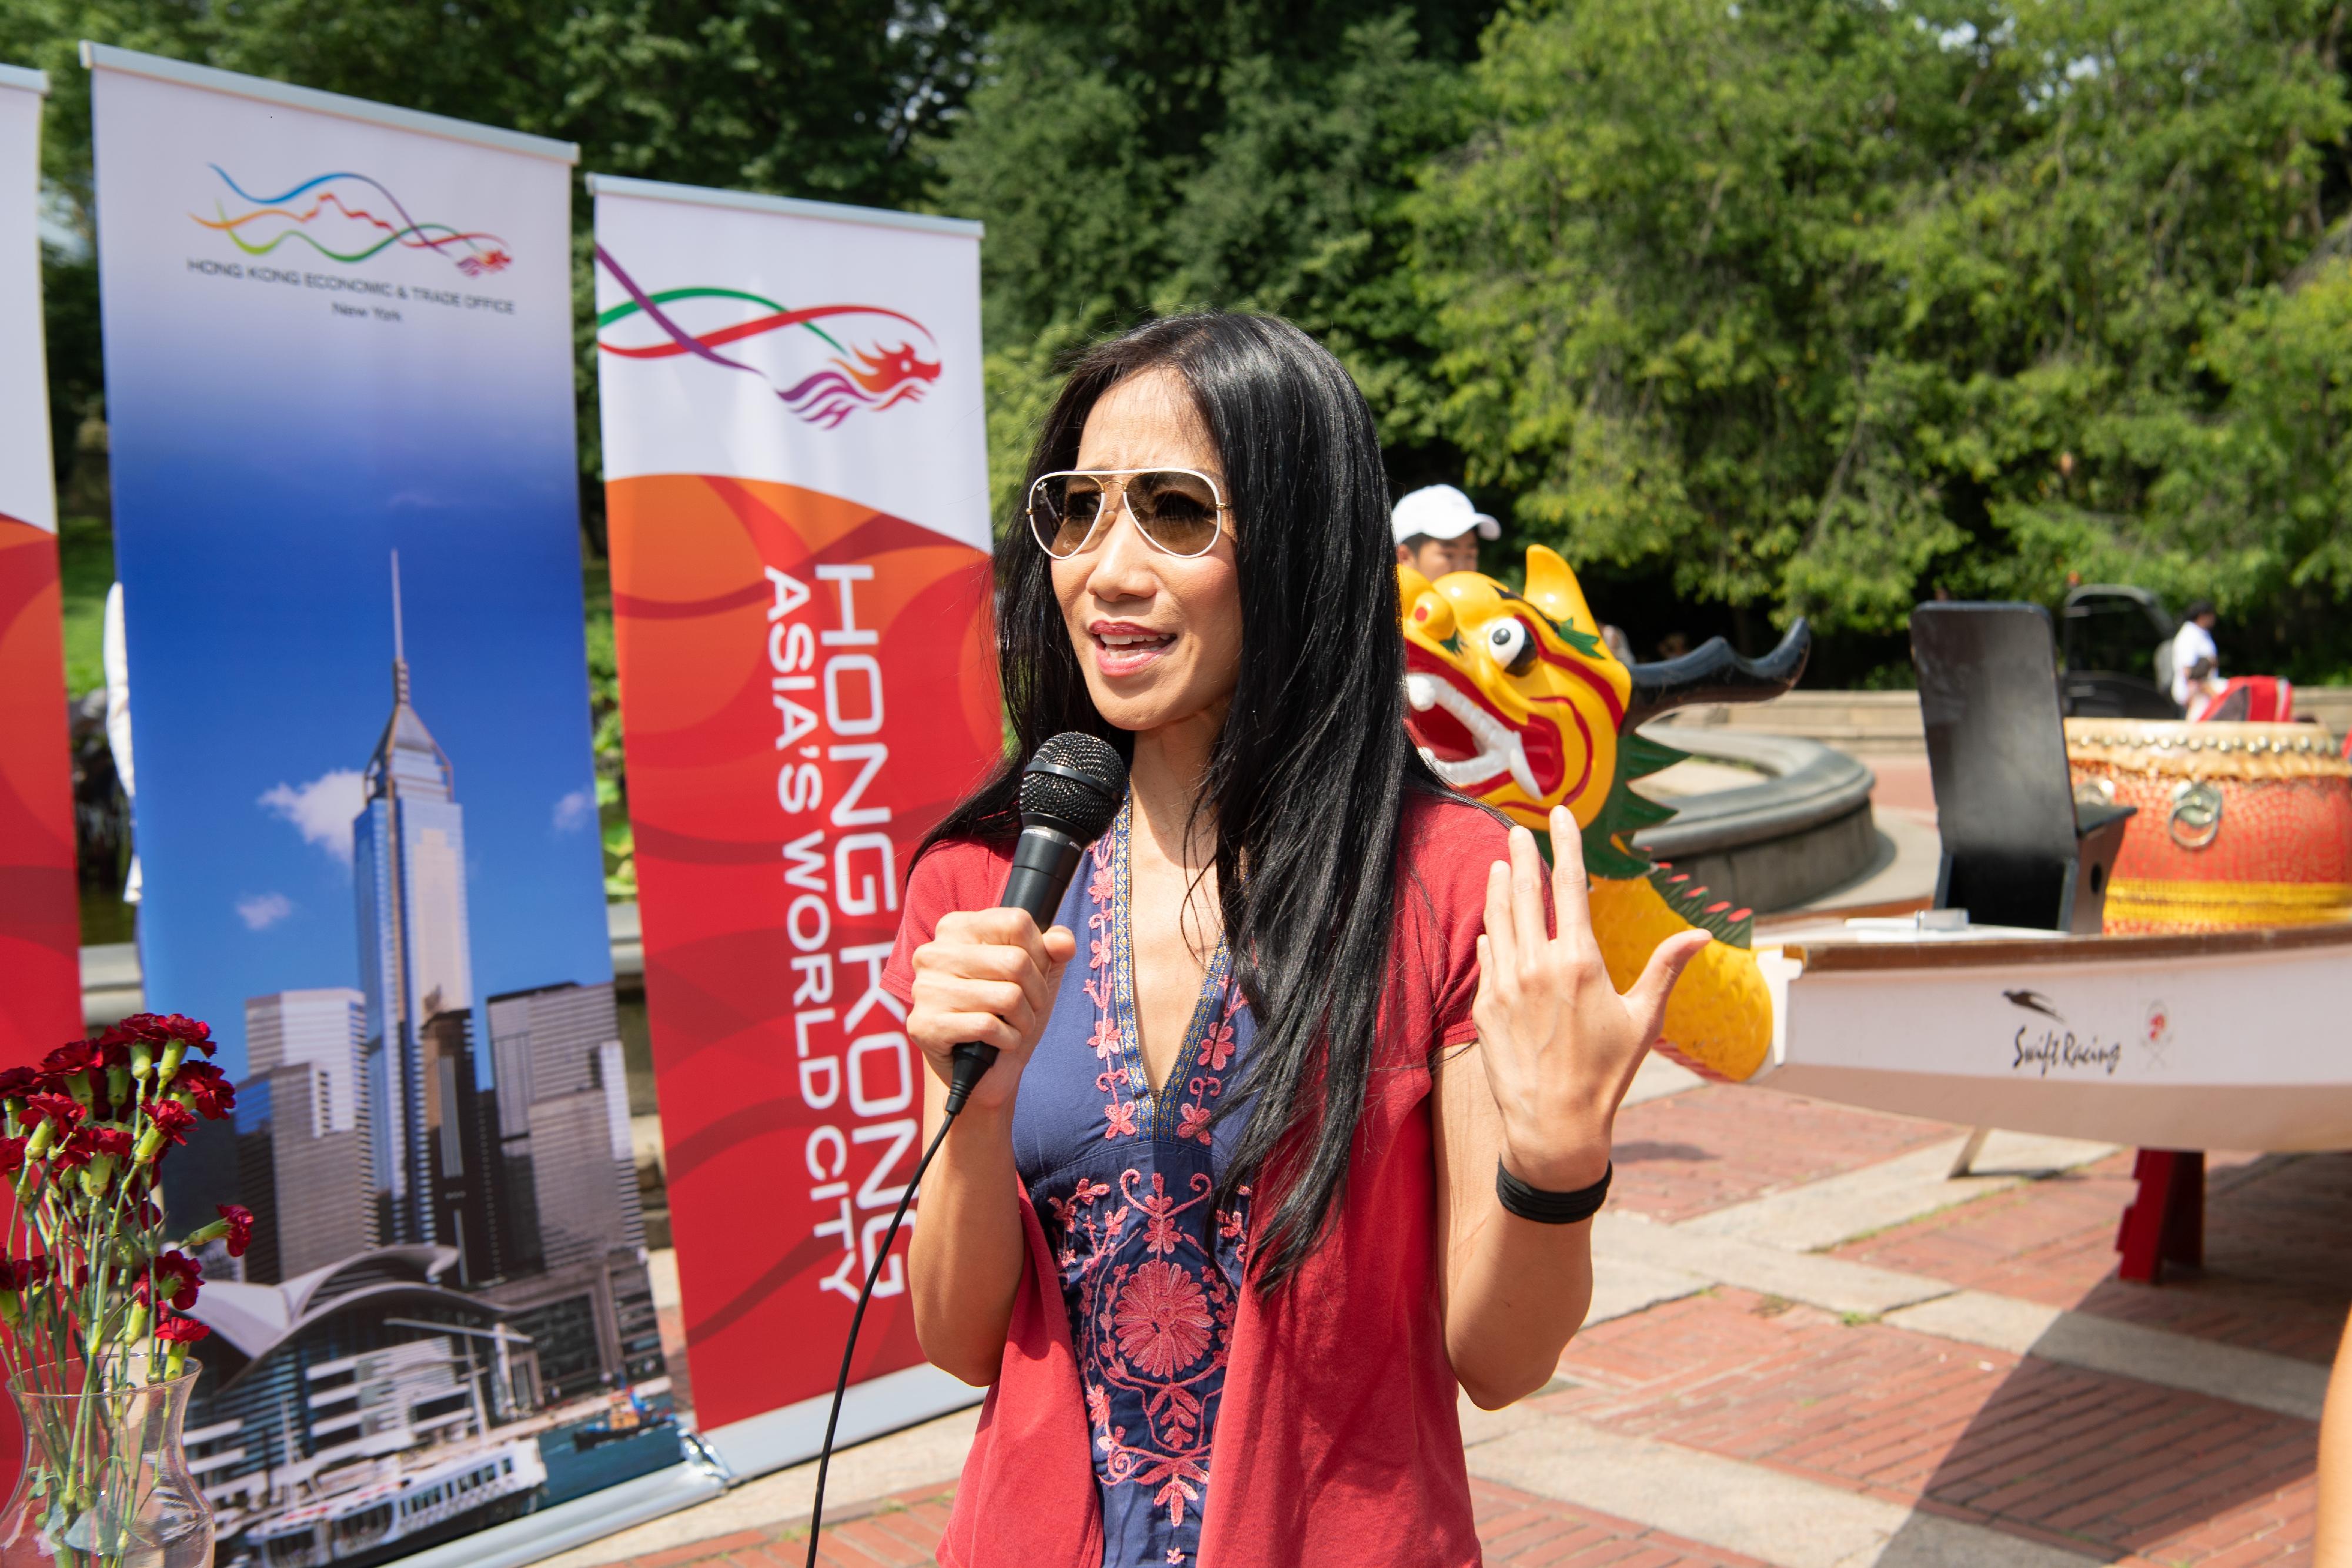 The Director of Hong Kong Economic and Trade Office, New York, Ms Candy Nip, speaks at the eye-dotting ceremony of the Hong Kong Dragon Boat Festival in New York held at Central Park on July 20, New York time.